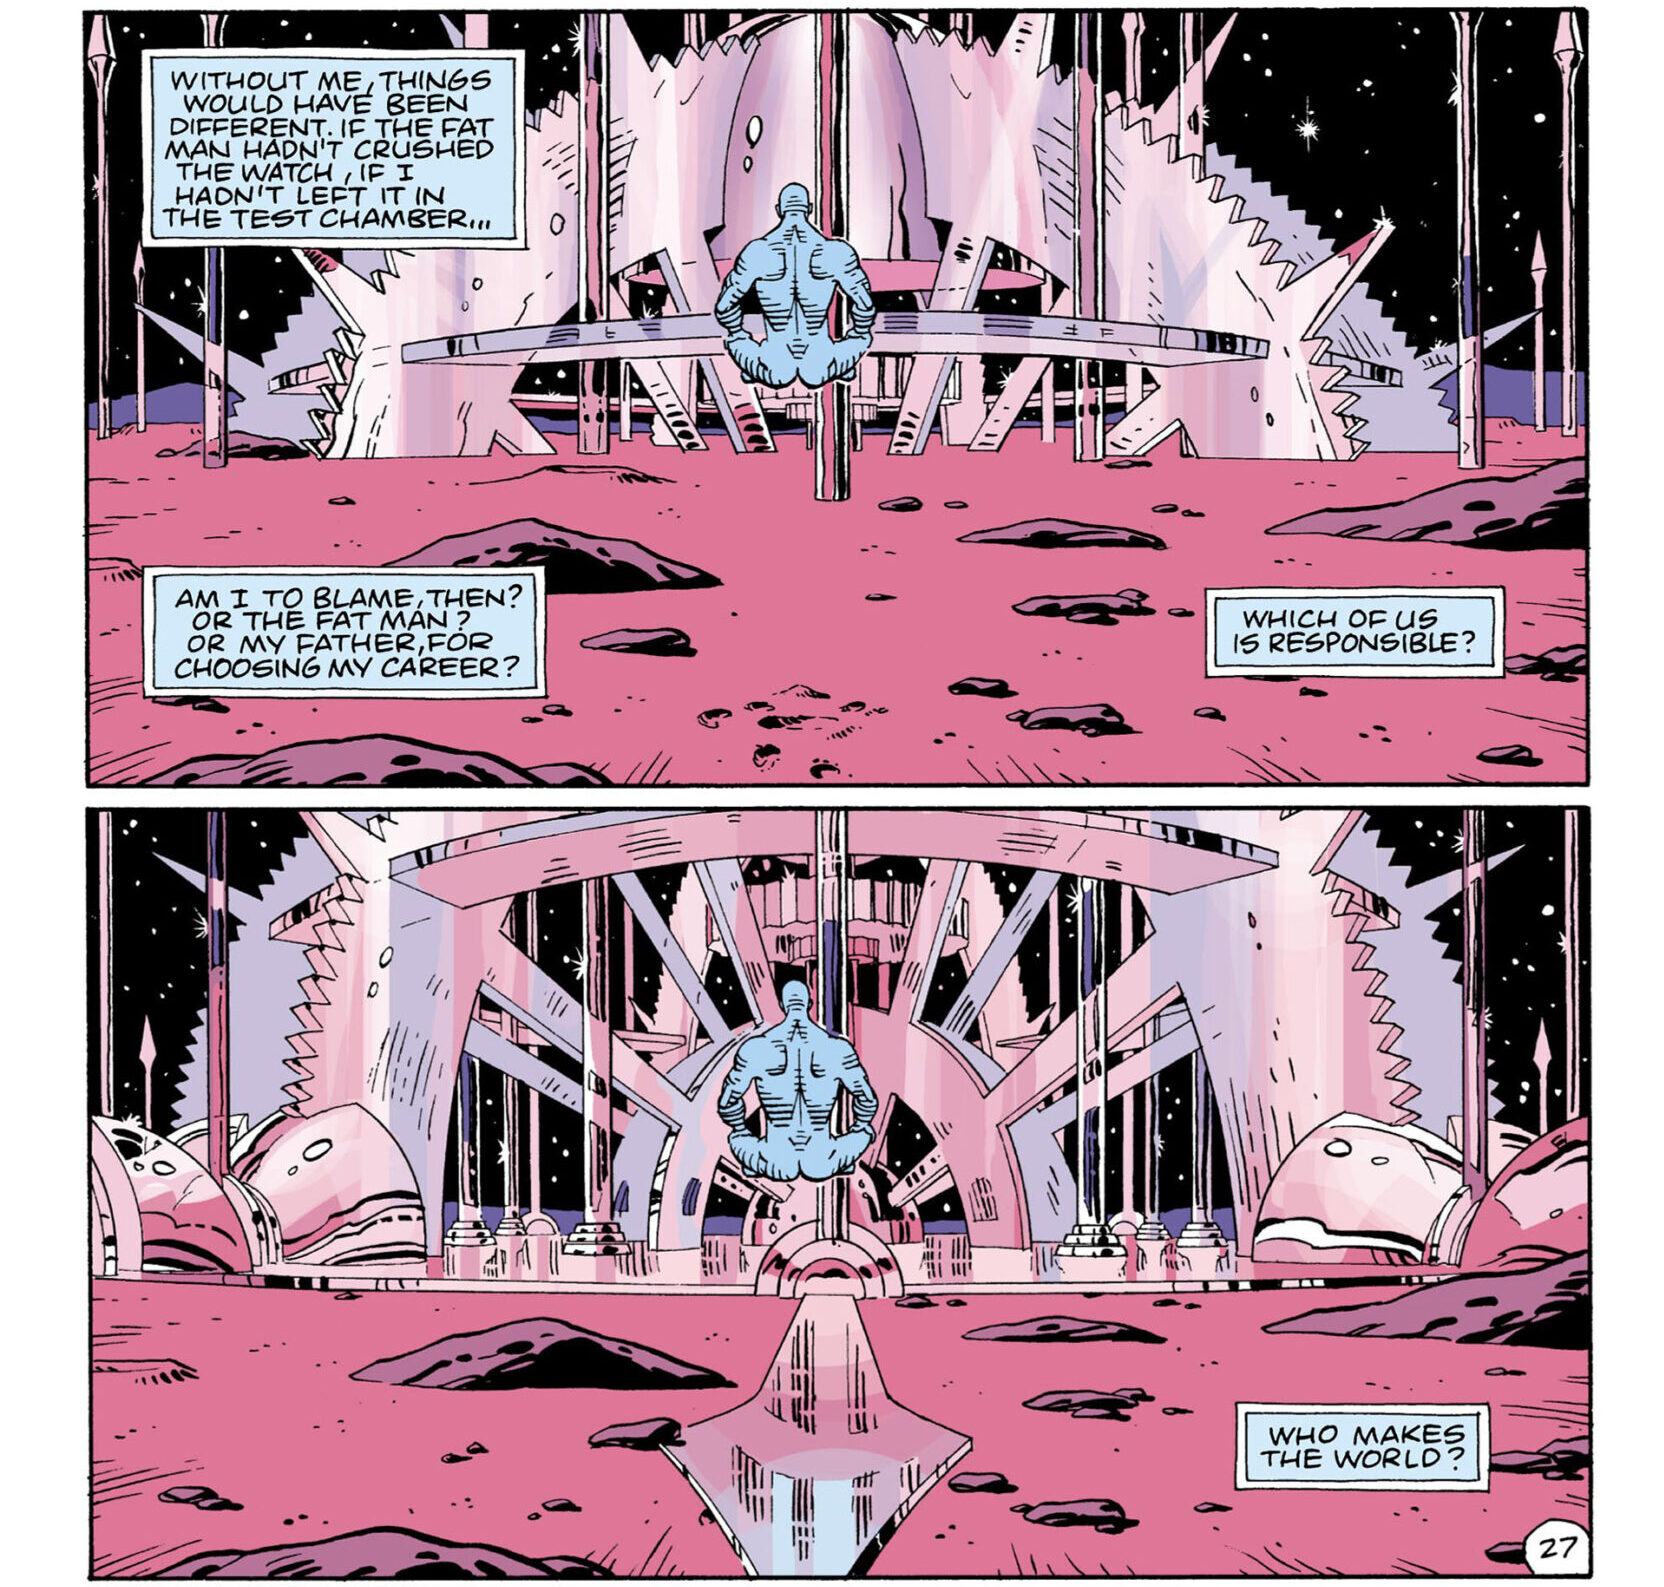 Doctor Manhattan begins the act of creation in Watchmen Vol. 1 #4 "Watchmaker" (1986), DC. Words by Alan Moore, art by Dave Gibbons and John Higgins.